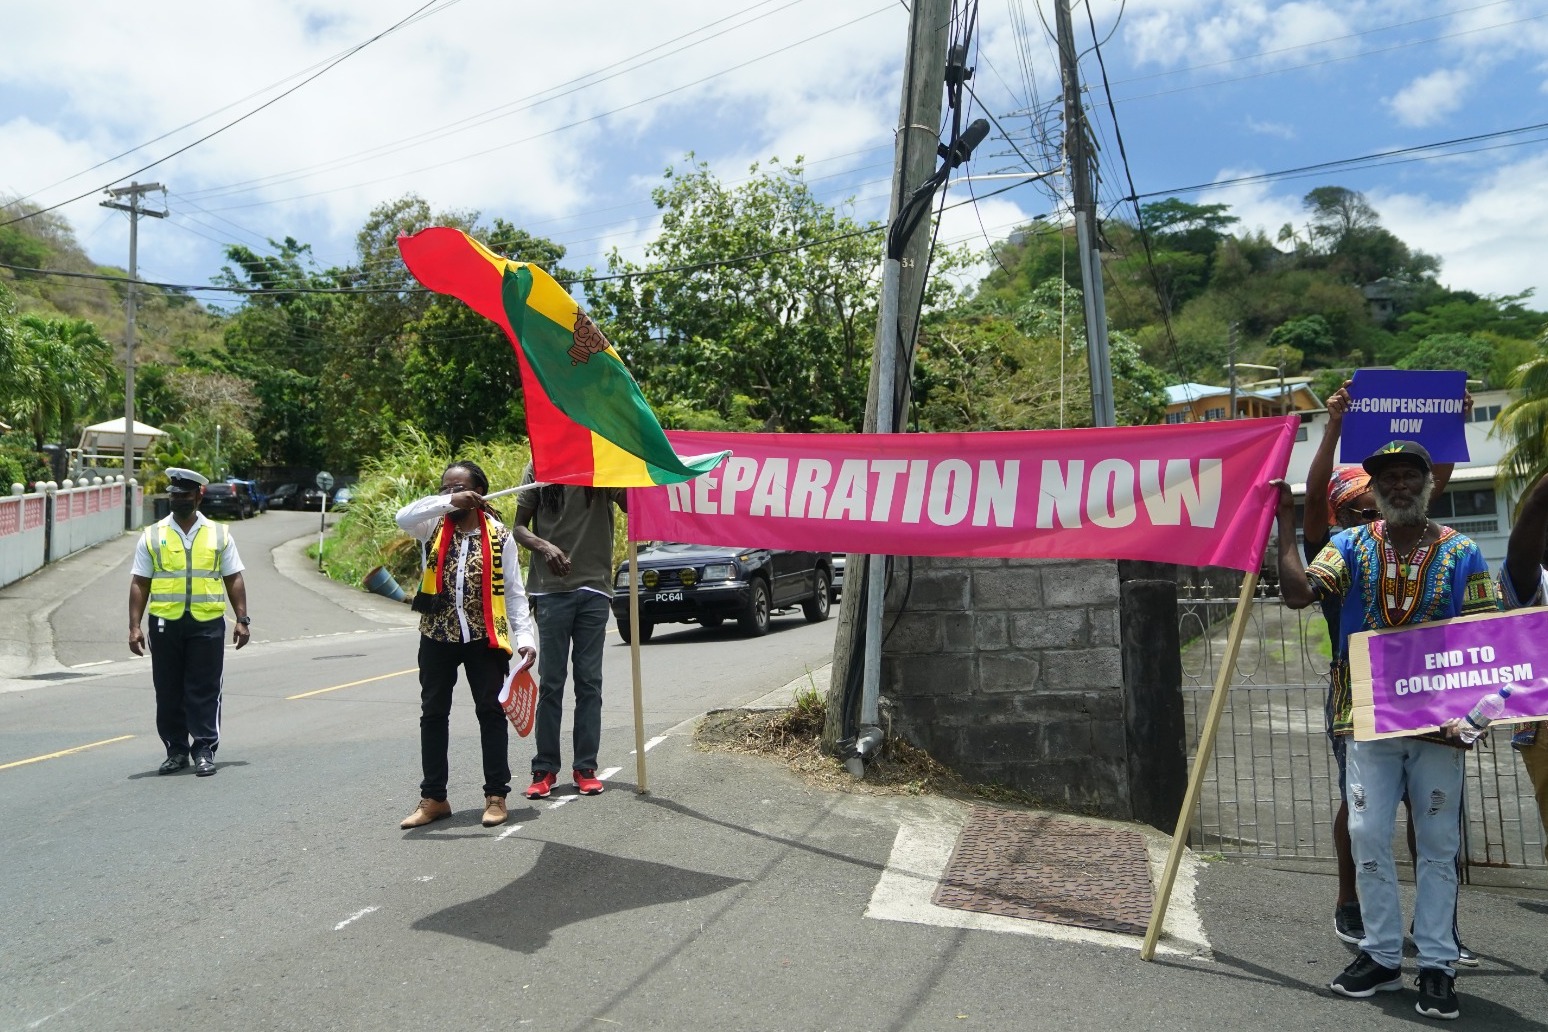 Edward and Sophie met with colonialism protests on second leg of Caribbean tour 